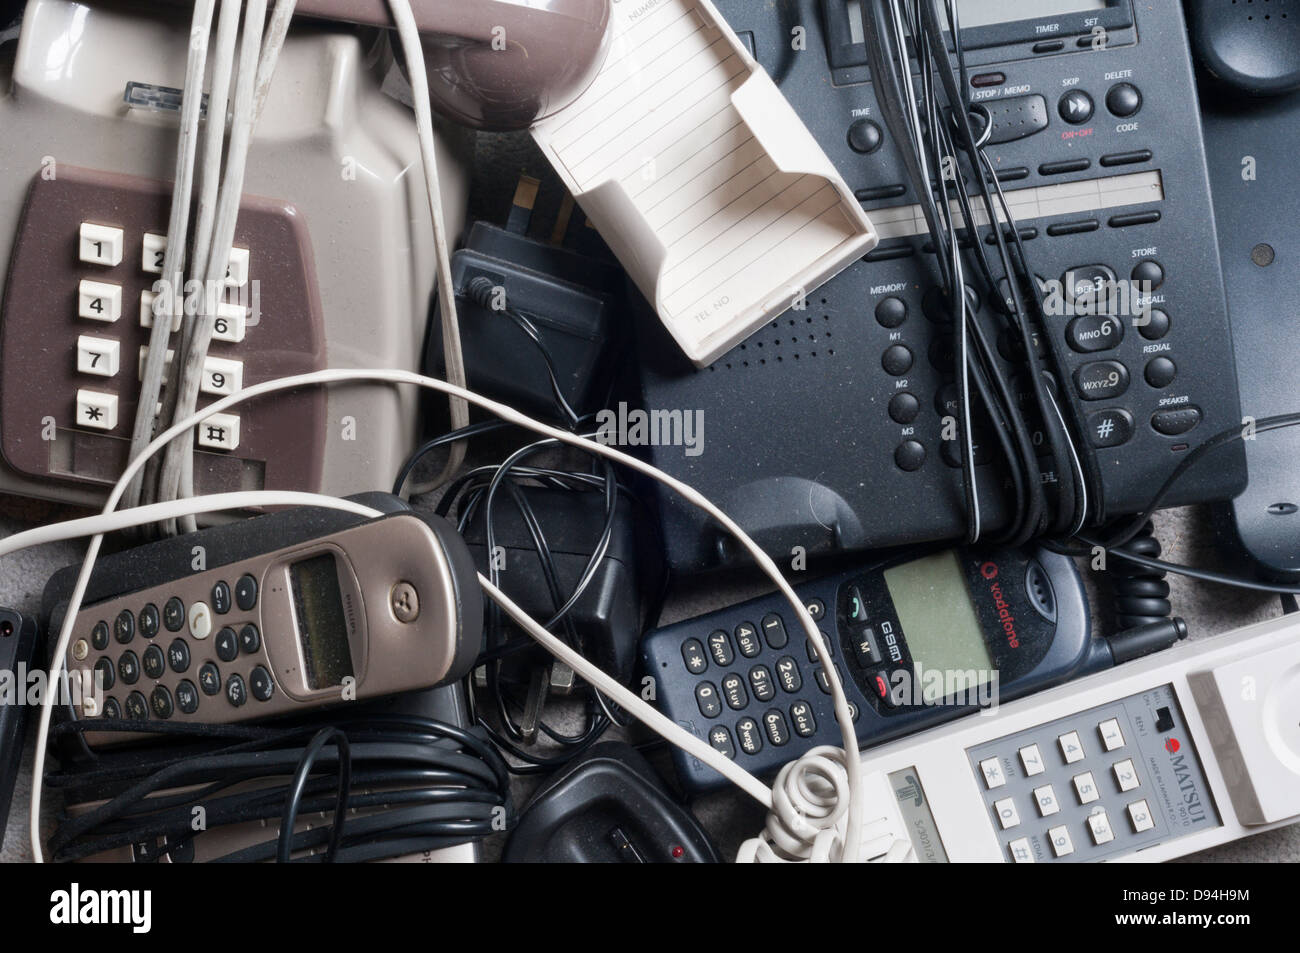 A pile of dusty old telephones awaiting recycling. Stock Photo